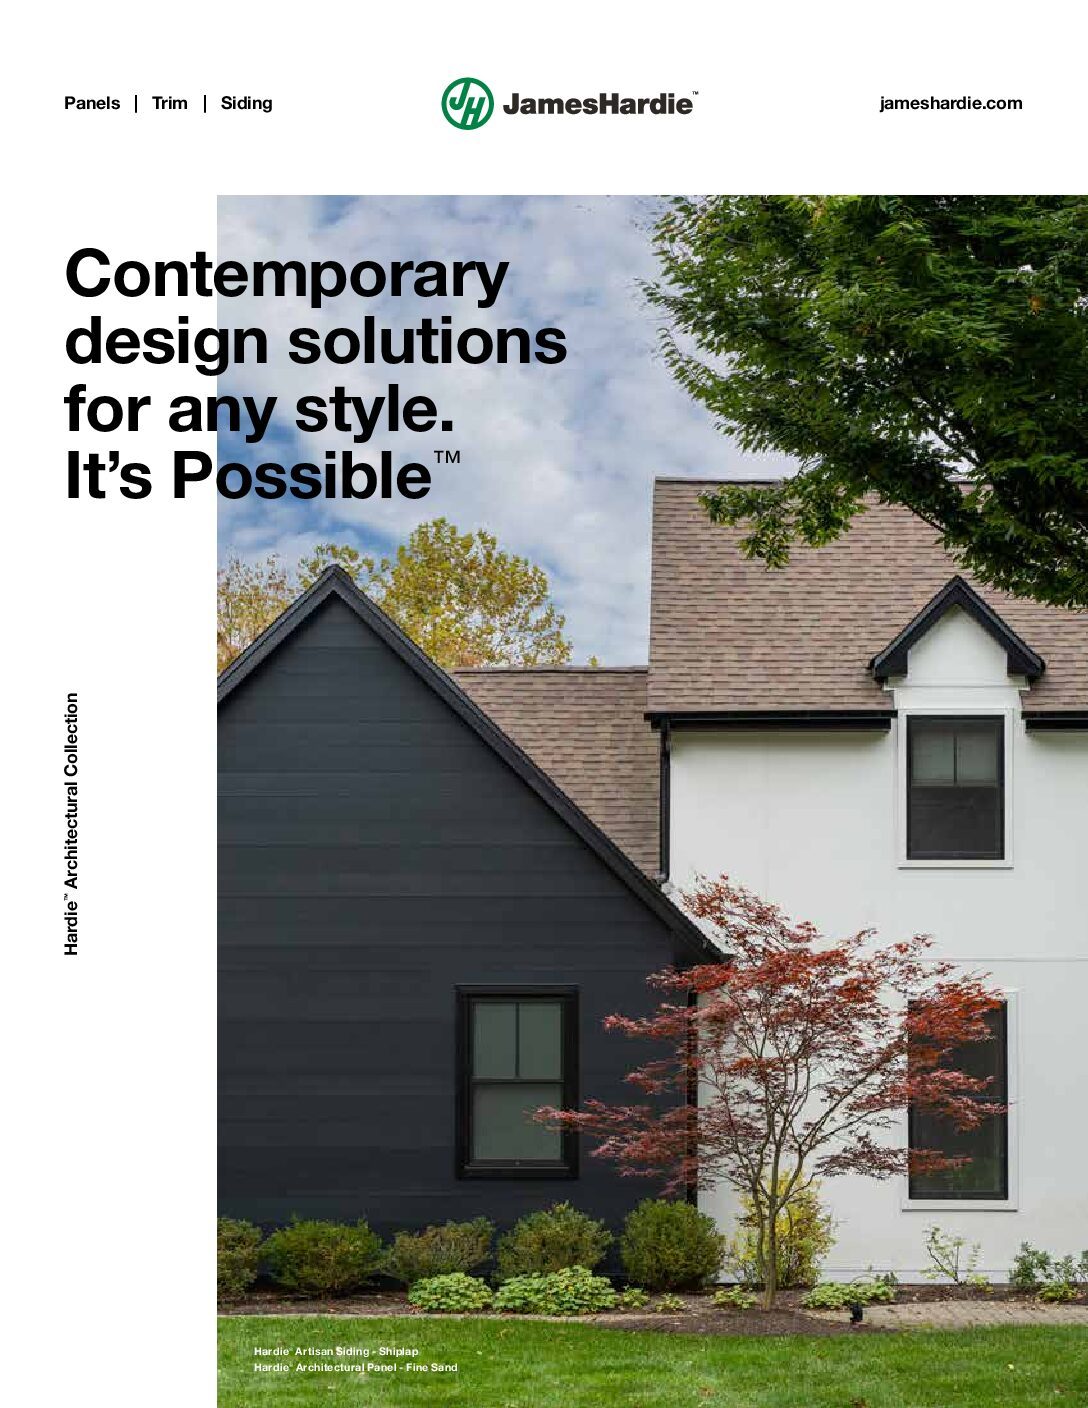 James Hardie exterior home design solutions ad.